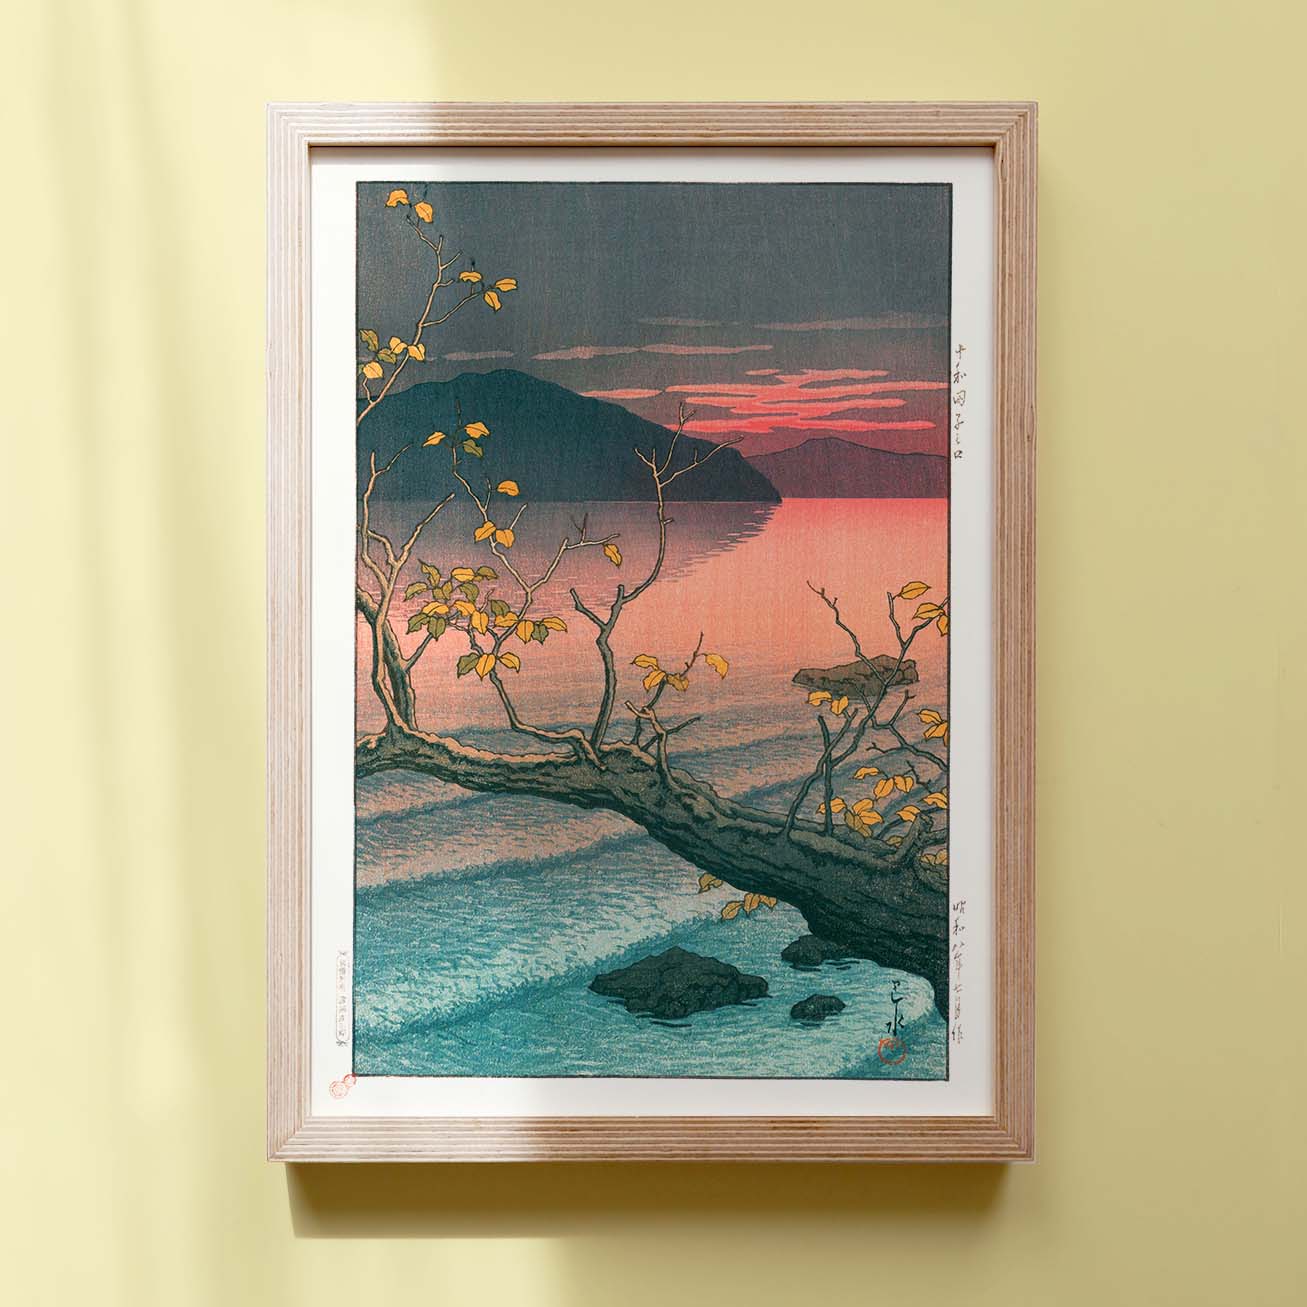 Framed Japanese Art Poster by Kawase Hasui, depicting a tree and mountain at sunset with vibrant autumn leaves